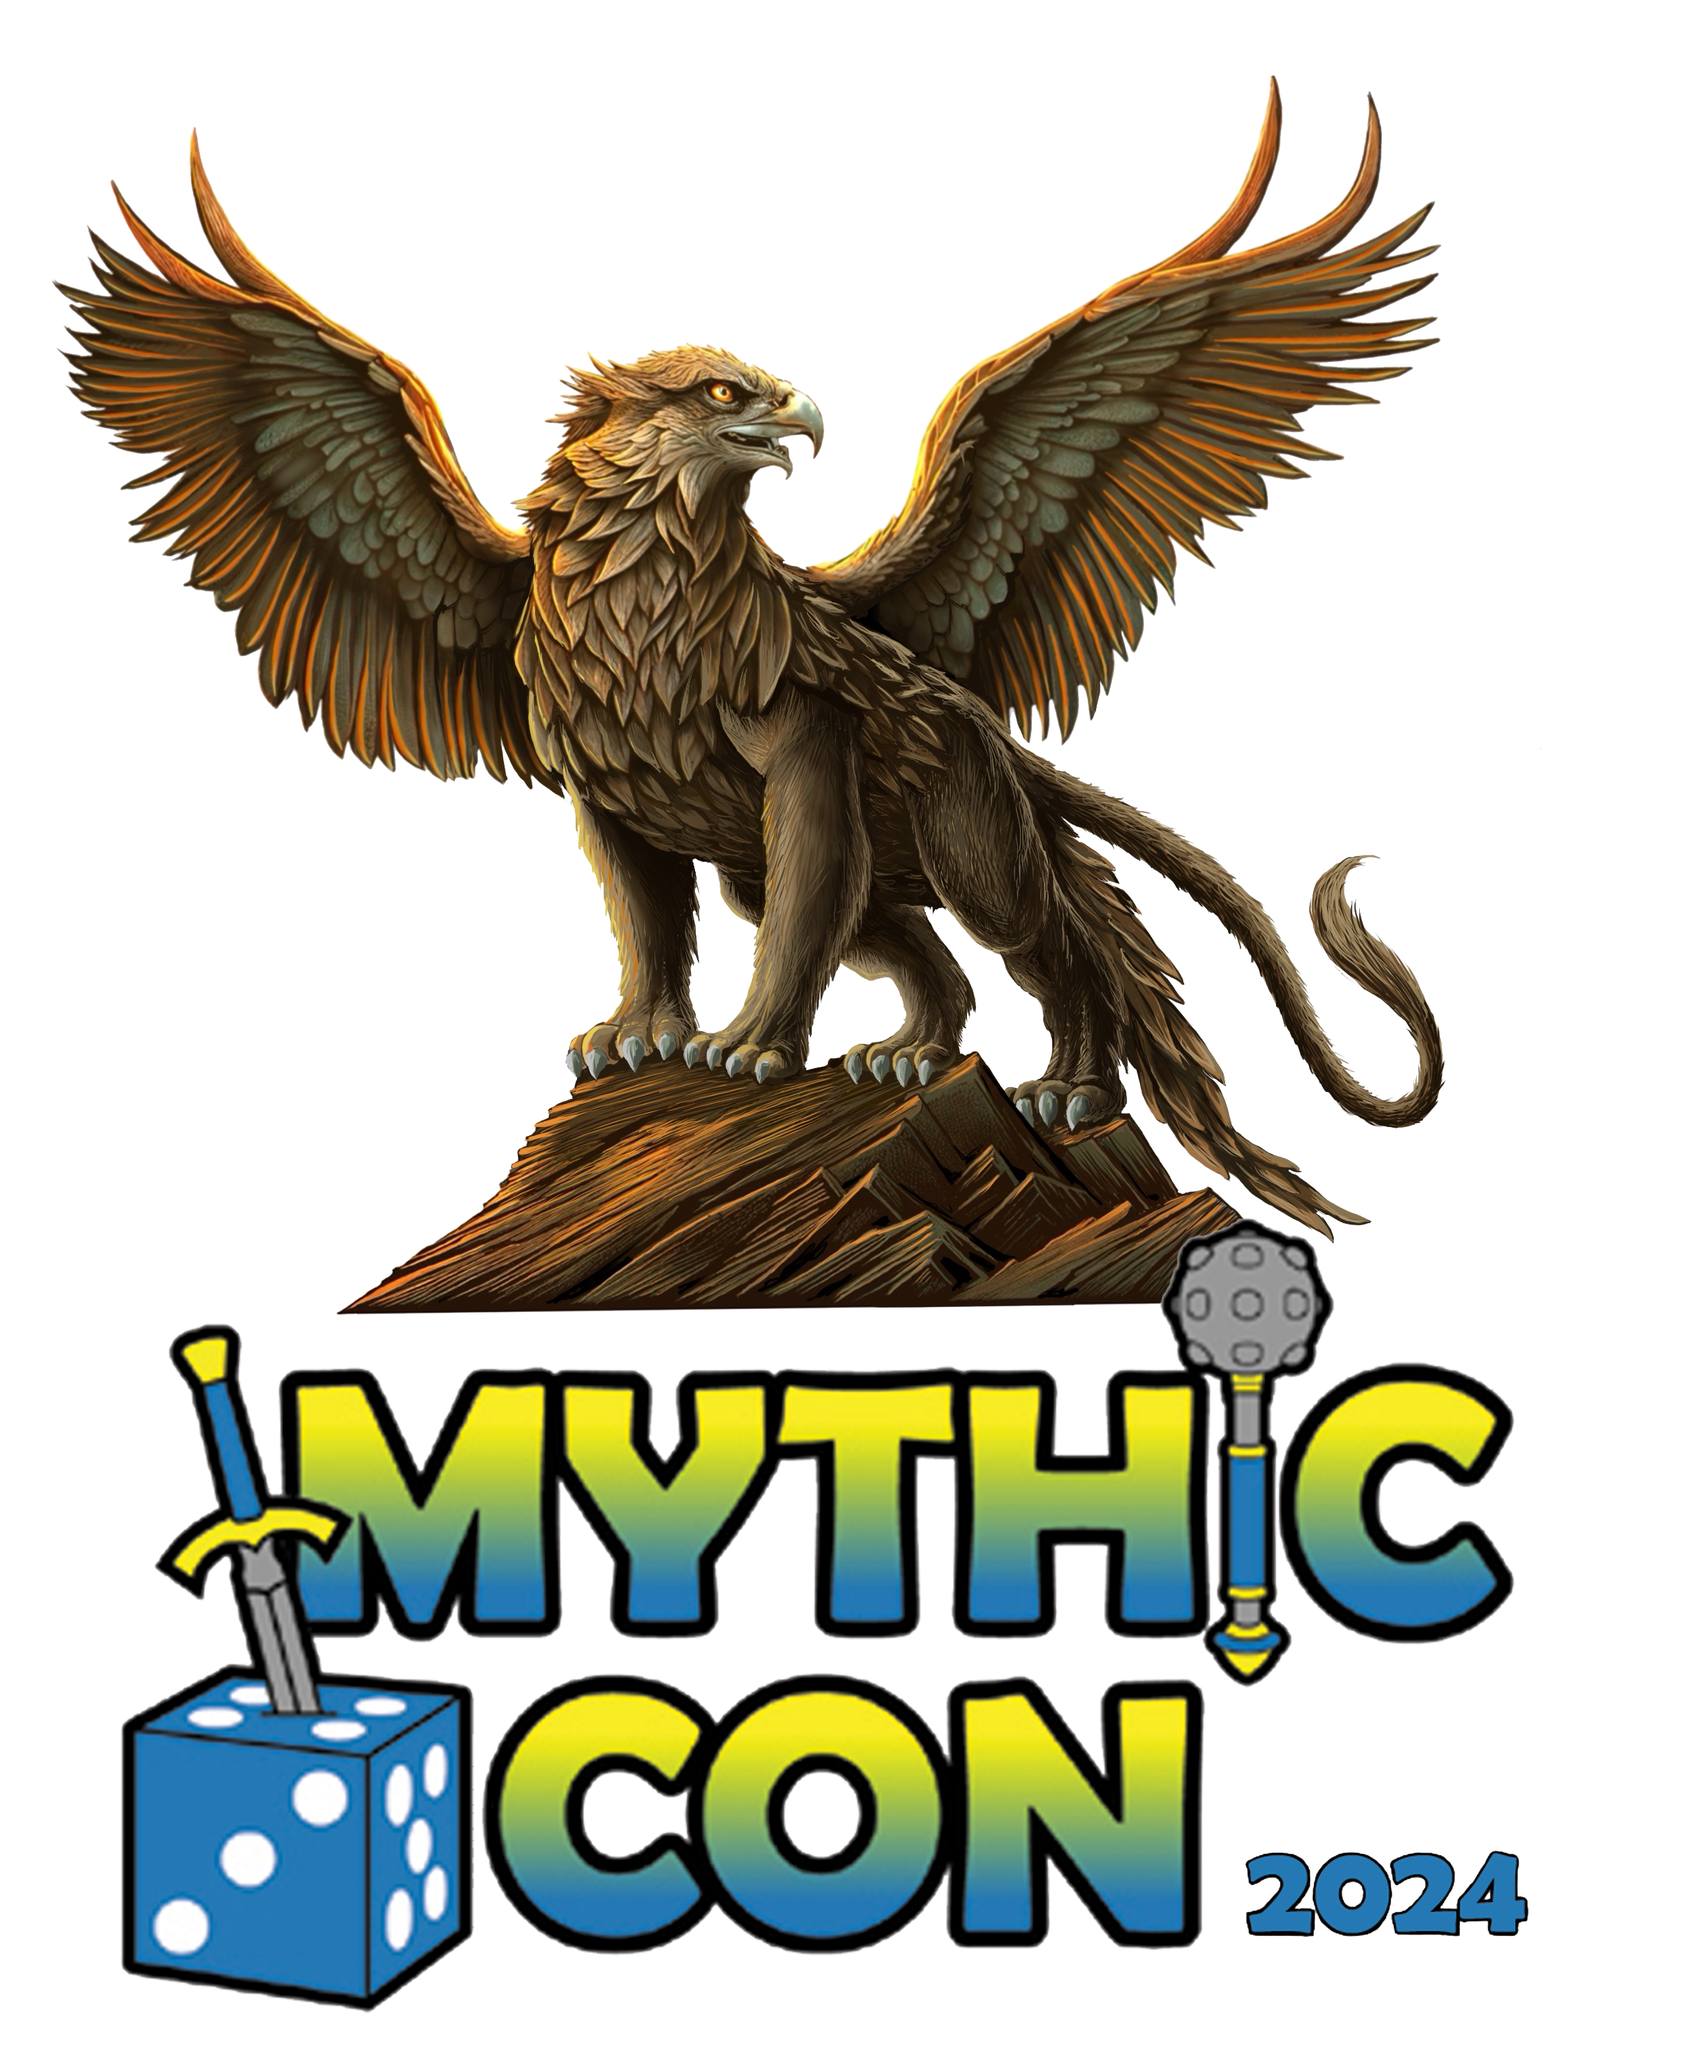 Griffin standing on a rock with Mythic Con logo and 2024 underneath